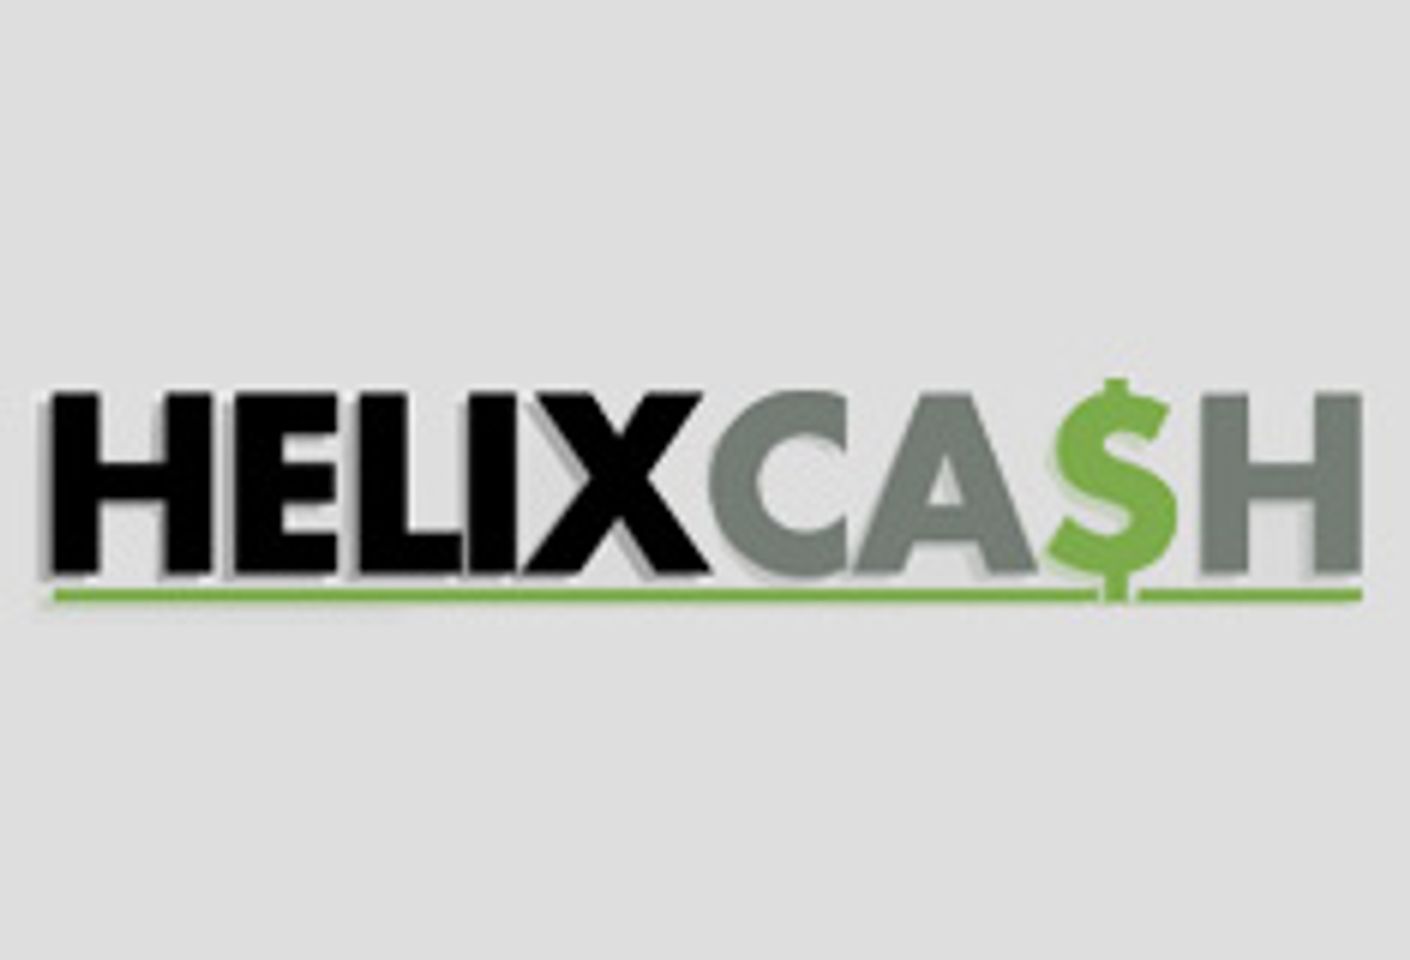 Joshua Maxwell Hired as Affiliate Coordinator for Helix Cash